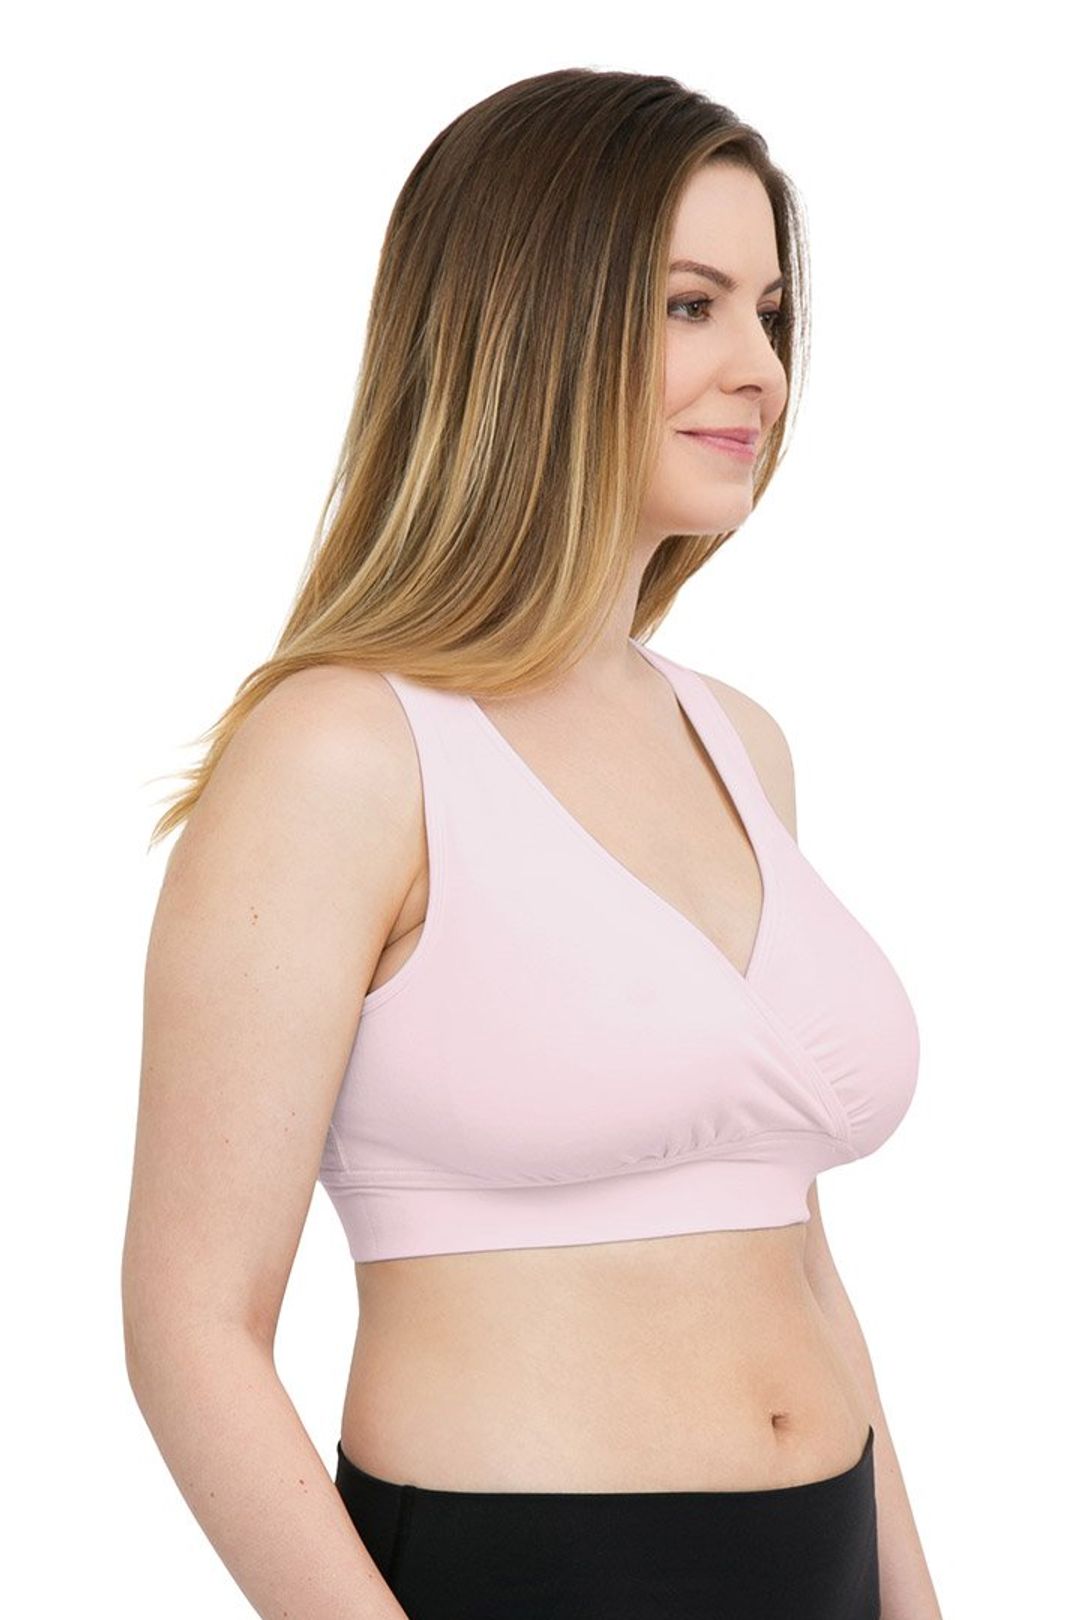 Kindred Bravely French Terry Racerback Nursing Sleep Bra - Soft Pink,  Small-Busty